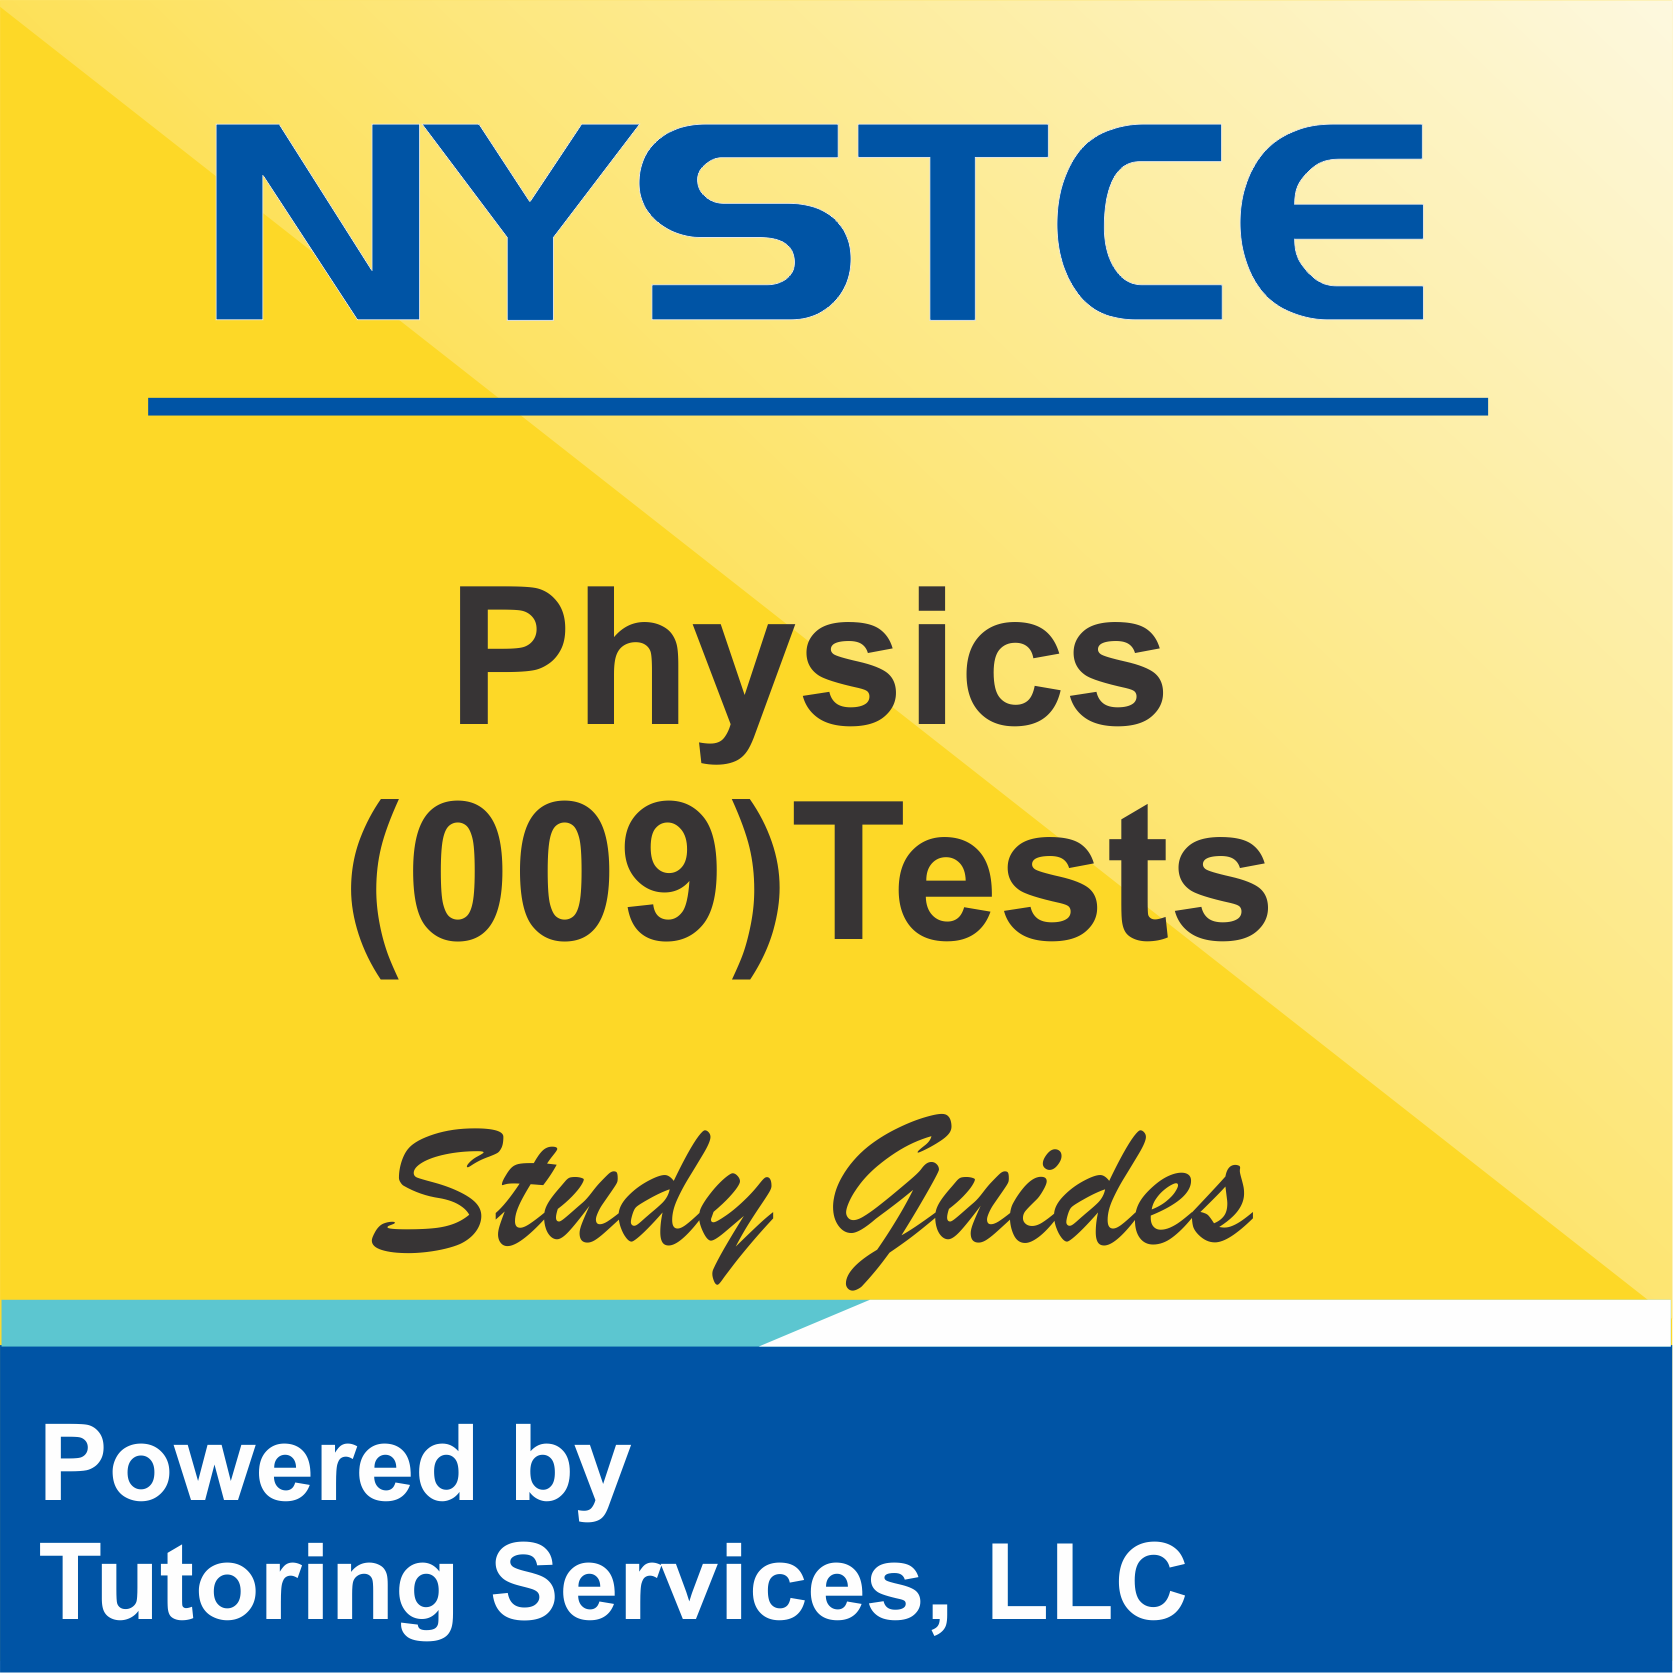 NYSTCE New York Licensure Test Information for Physics 009